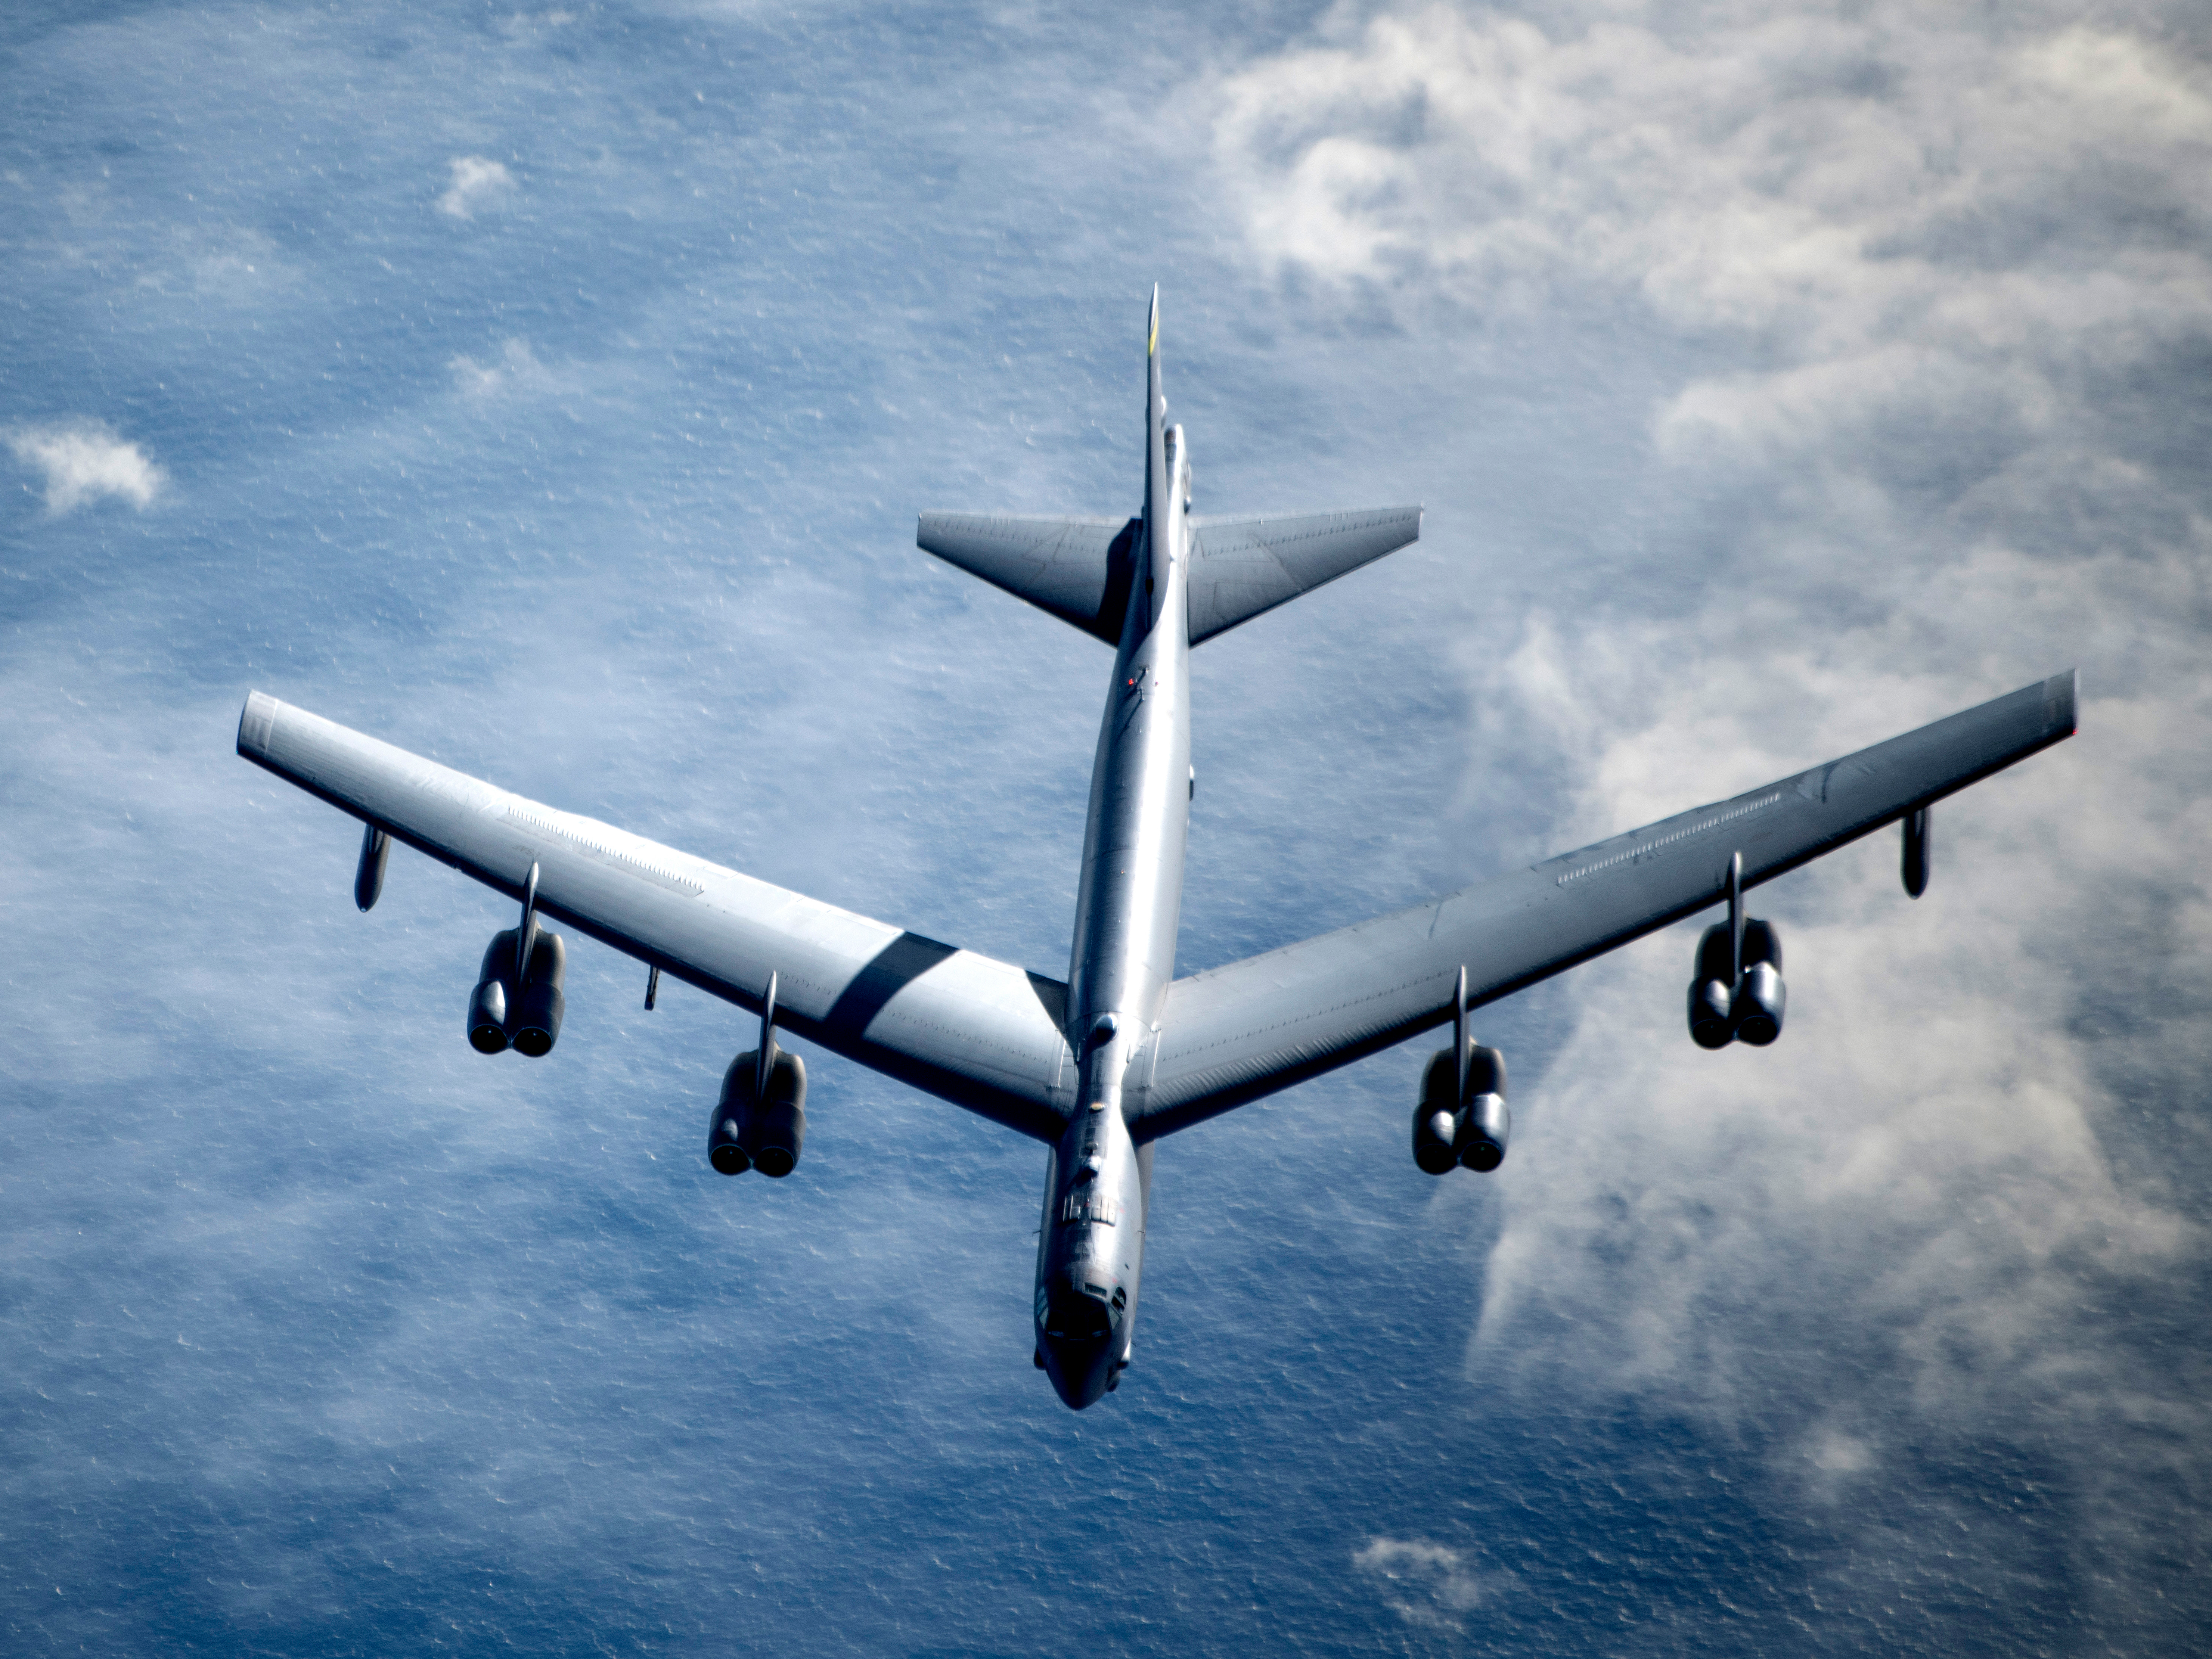 A US B-52H Stratofortress bomber during a strategic bomber mission on May 7, 2020.